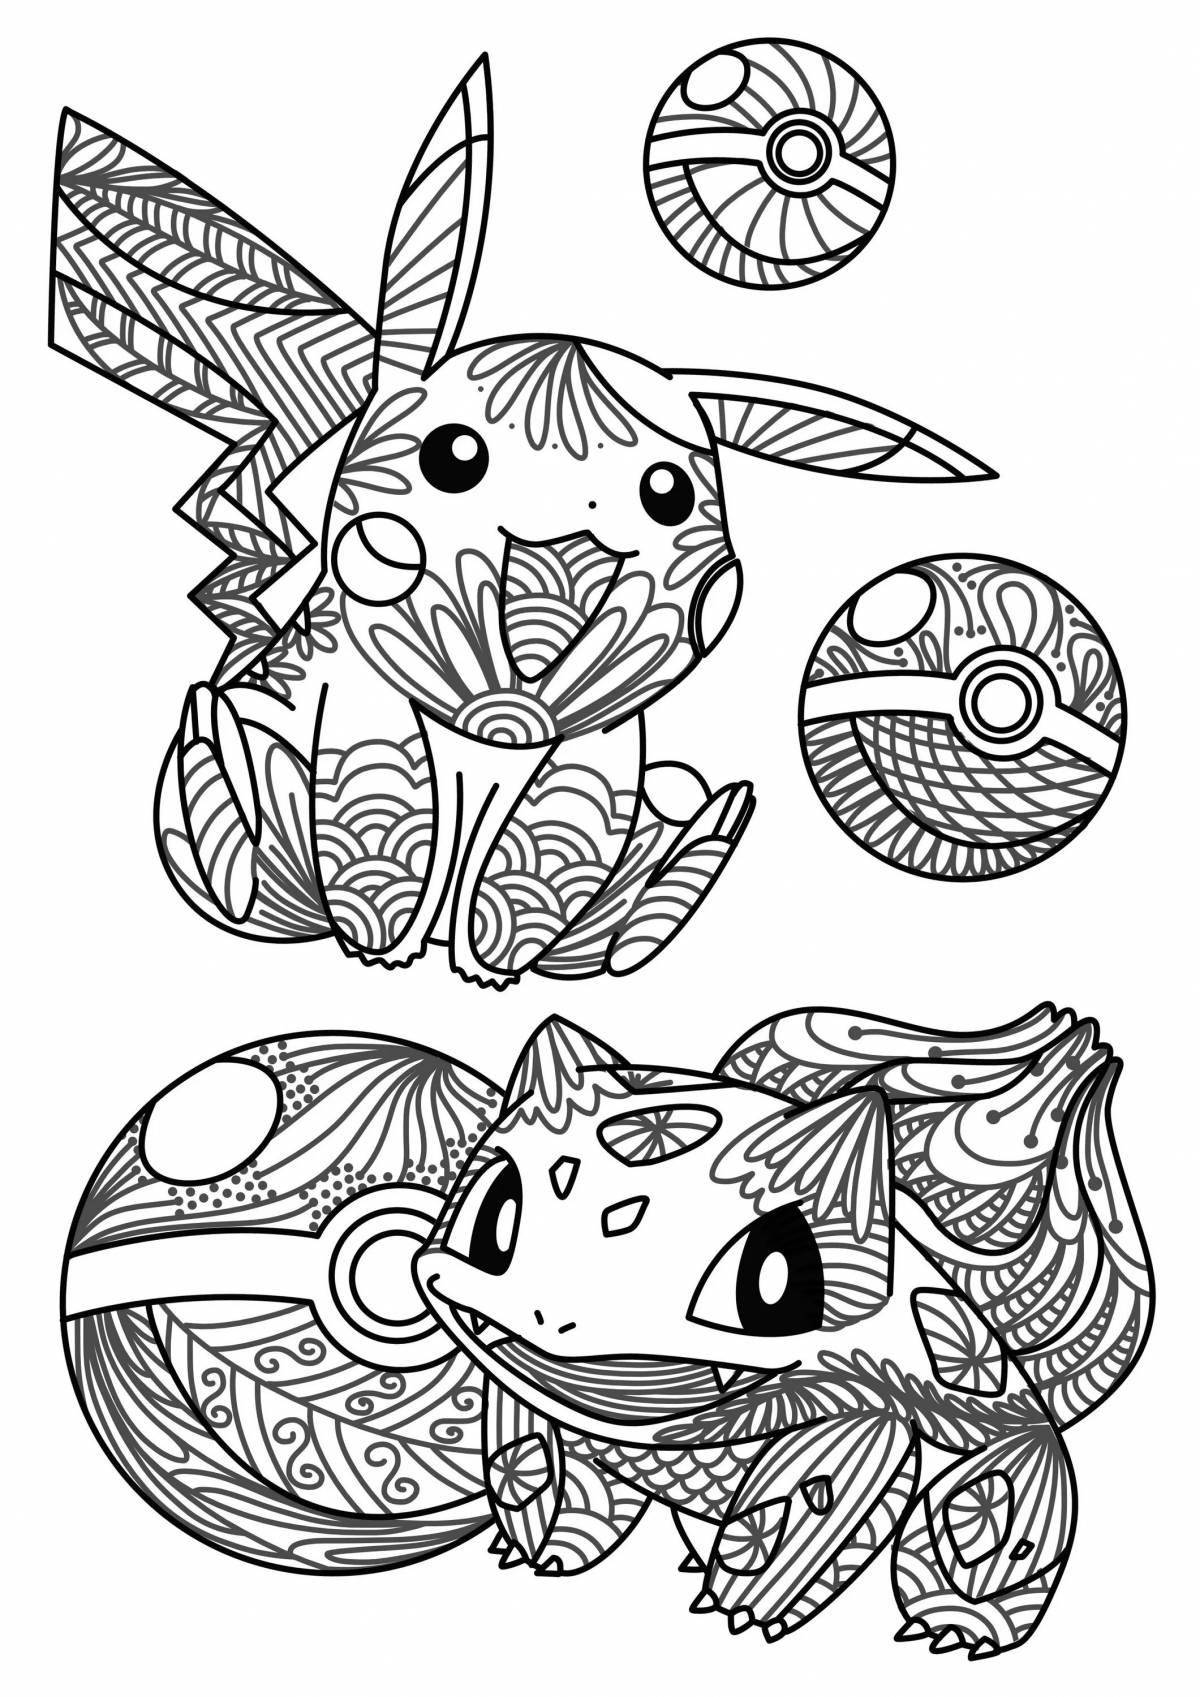 Exciting and complex pikachu coloring book